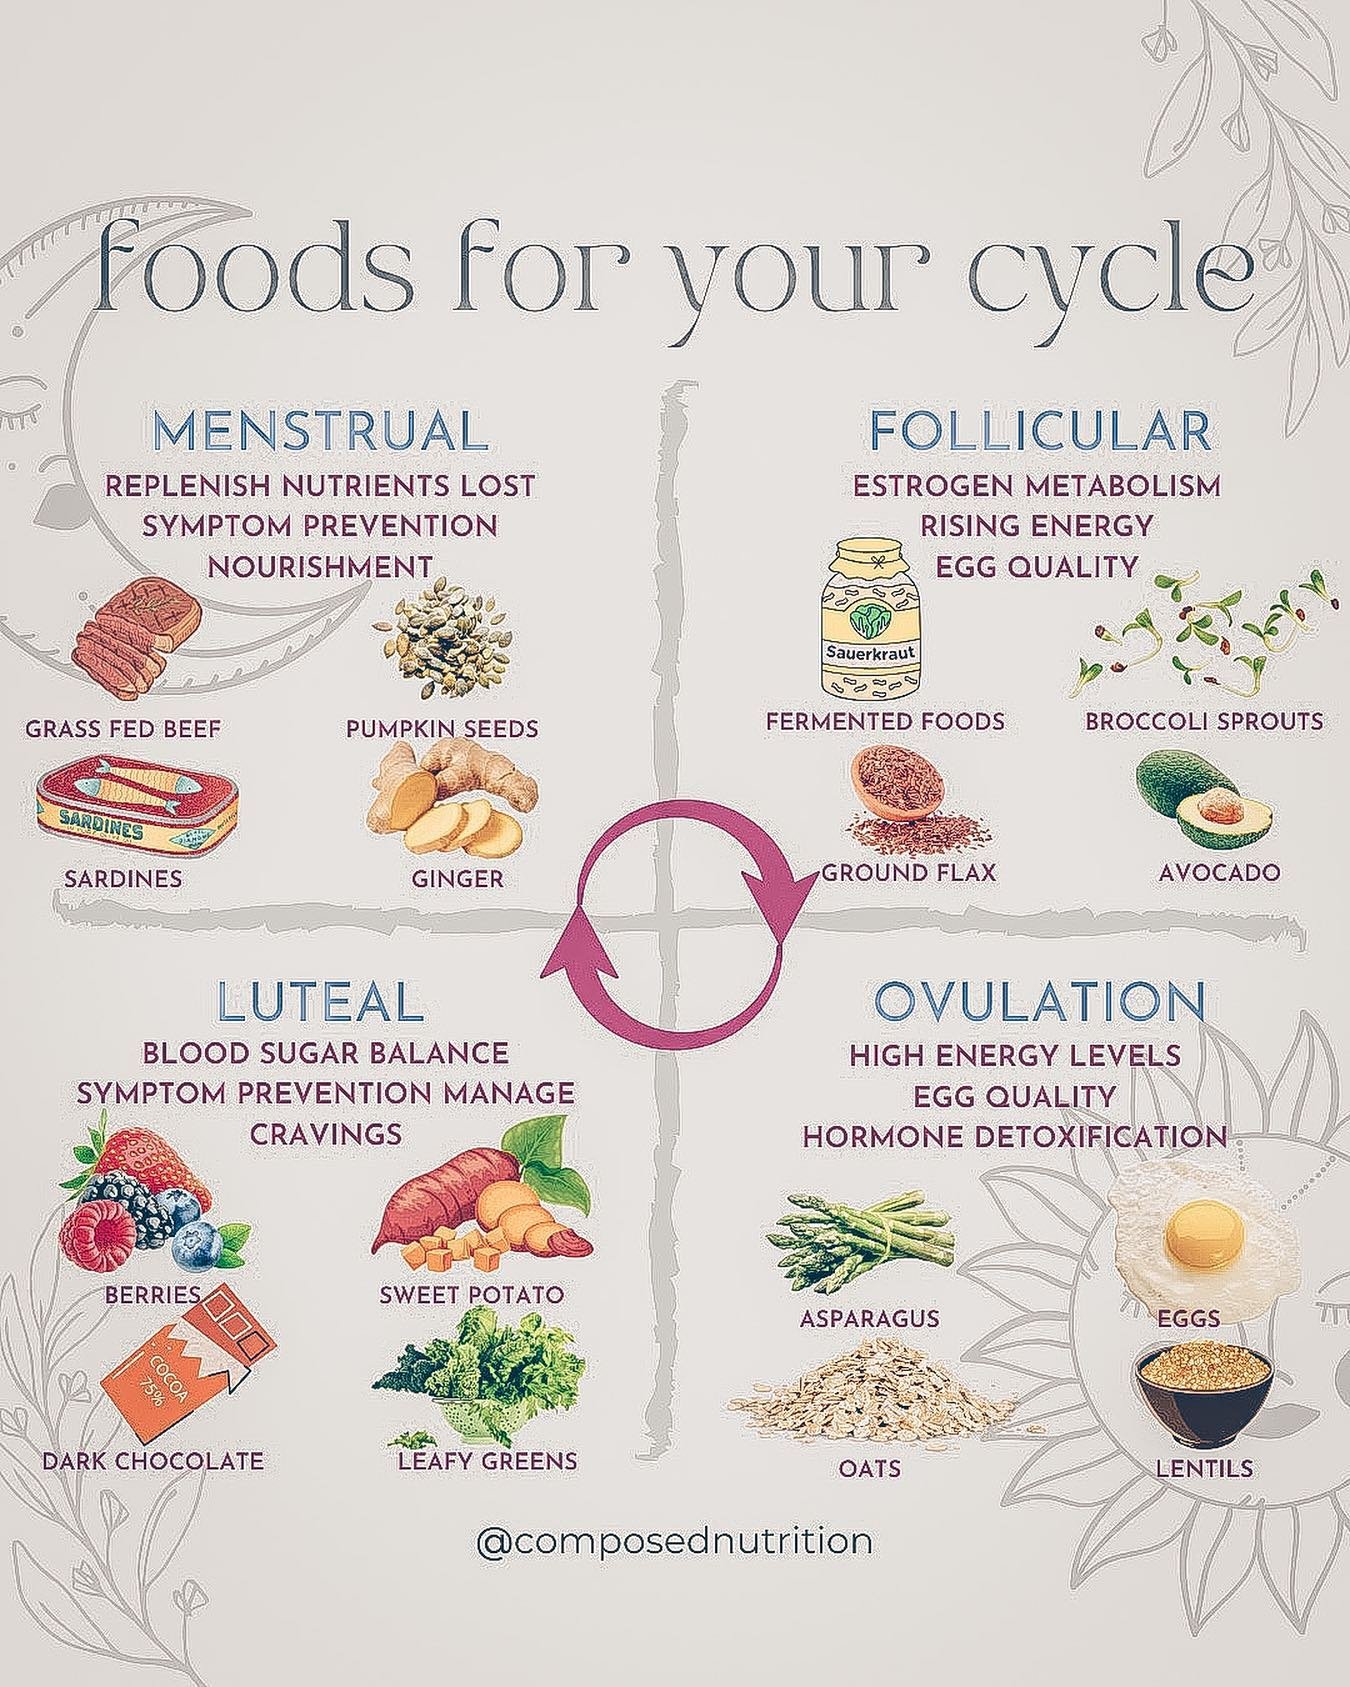 CYCLE PHASE FOODS 🌼

Certain foods or herbs contain specific nutrients that help to support what is going on hormonally during each phase!

Remember, all of these foods can be included anytime, I&rsquo;m just highlighting why they can be extra suppo